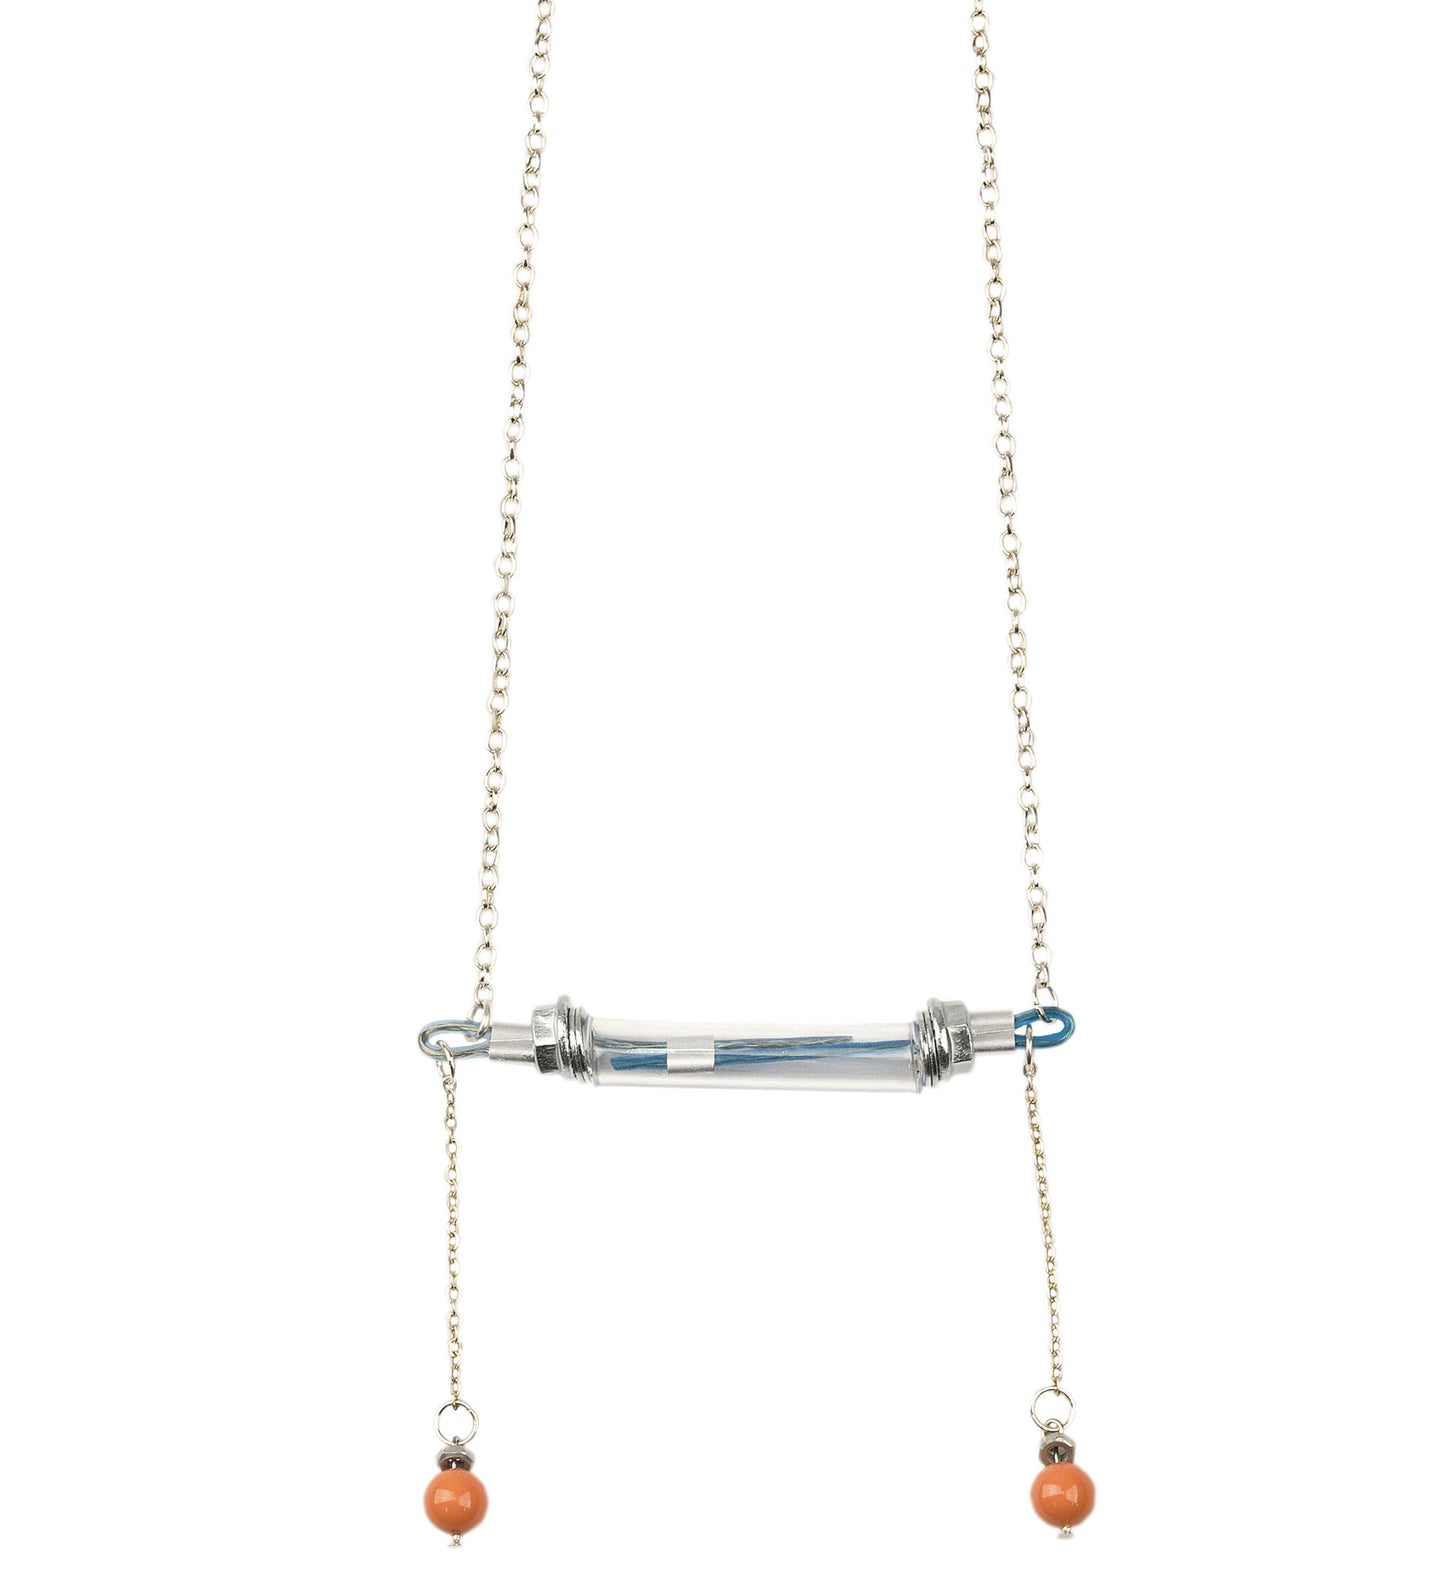 We craft the strongest base for all your experiences and keep them safely. It consists of building materials such as screws, metal cable covered with light blue/nude plastic and transparant tube. Also decorated with orange Swarovski pearls. The length of chain is about 70 cm. Every Mellow piece has it's own life code, so do this one - P6/007